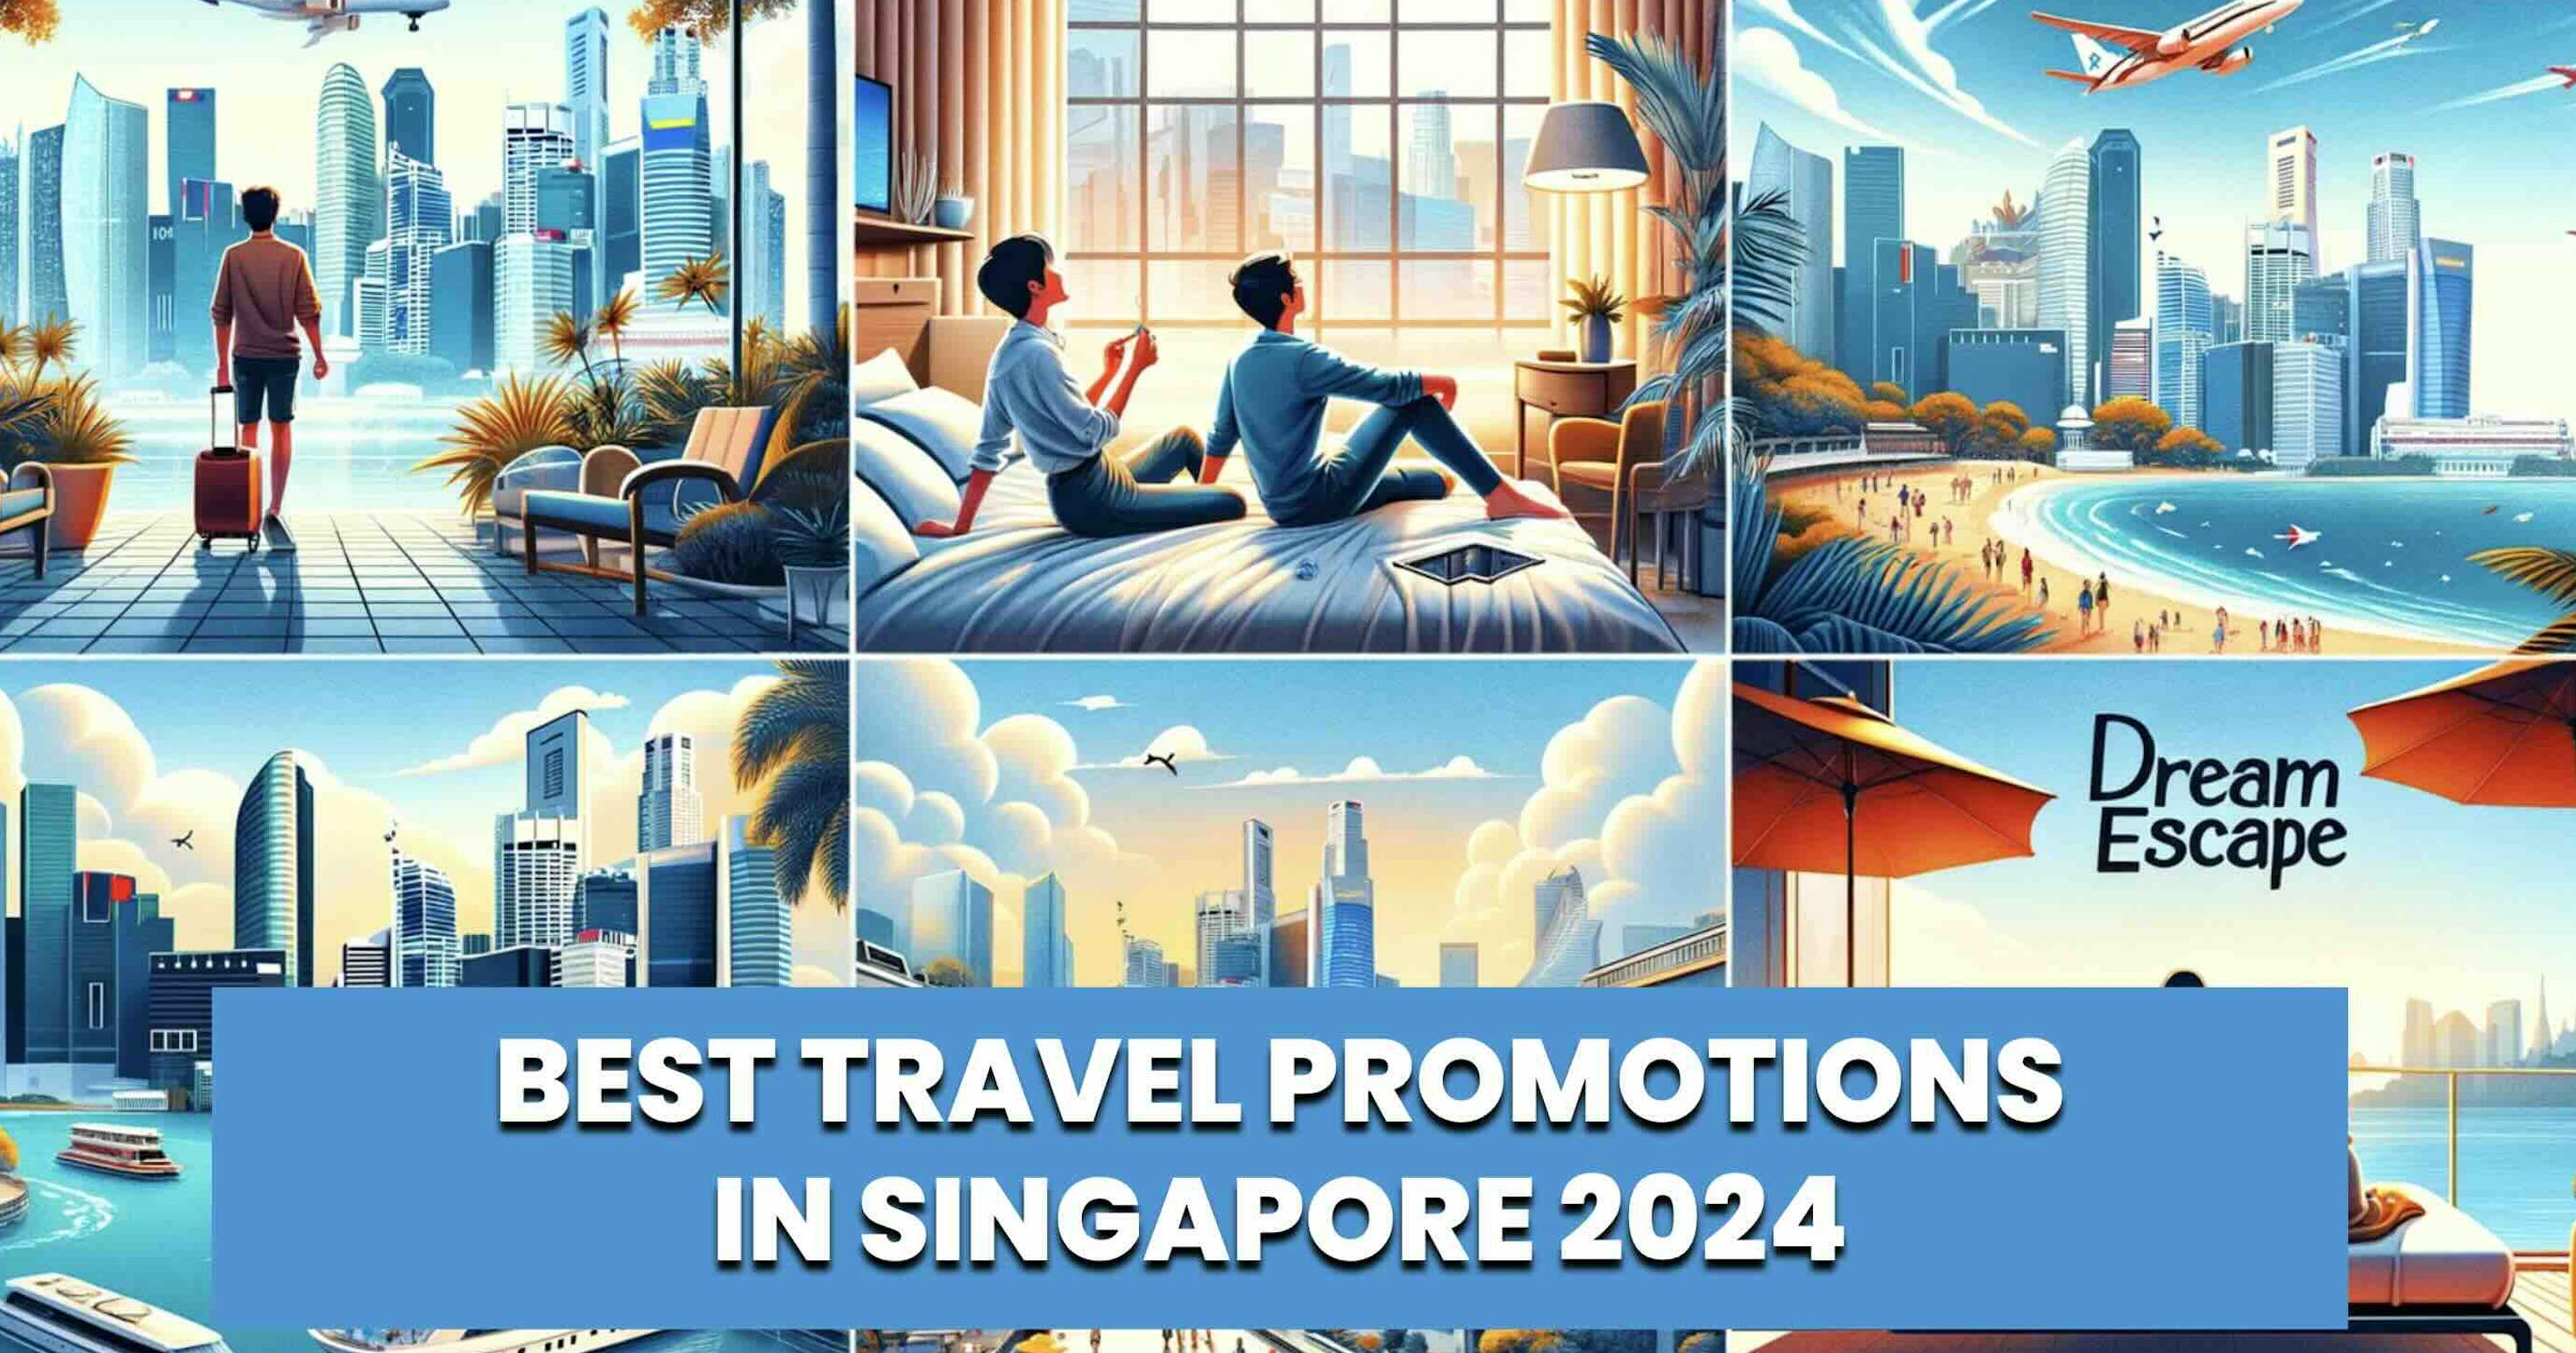 Best Travel Promotions in Singapore 2024